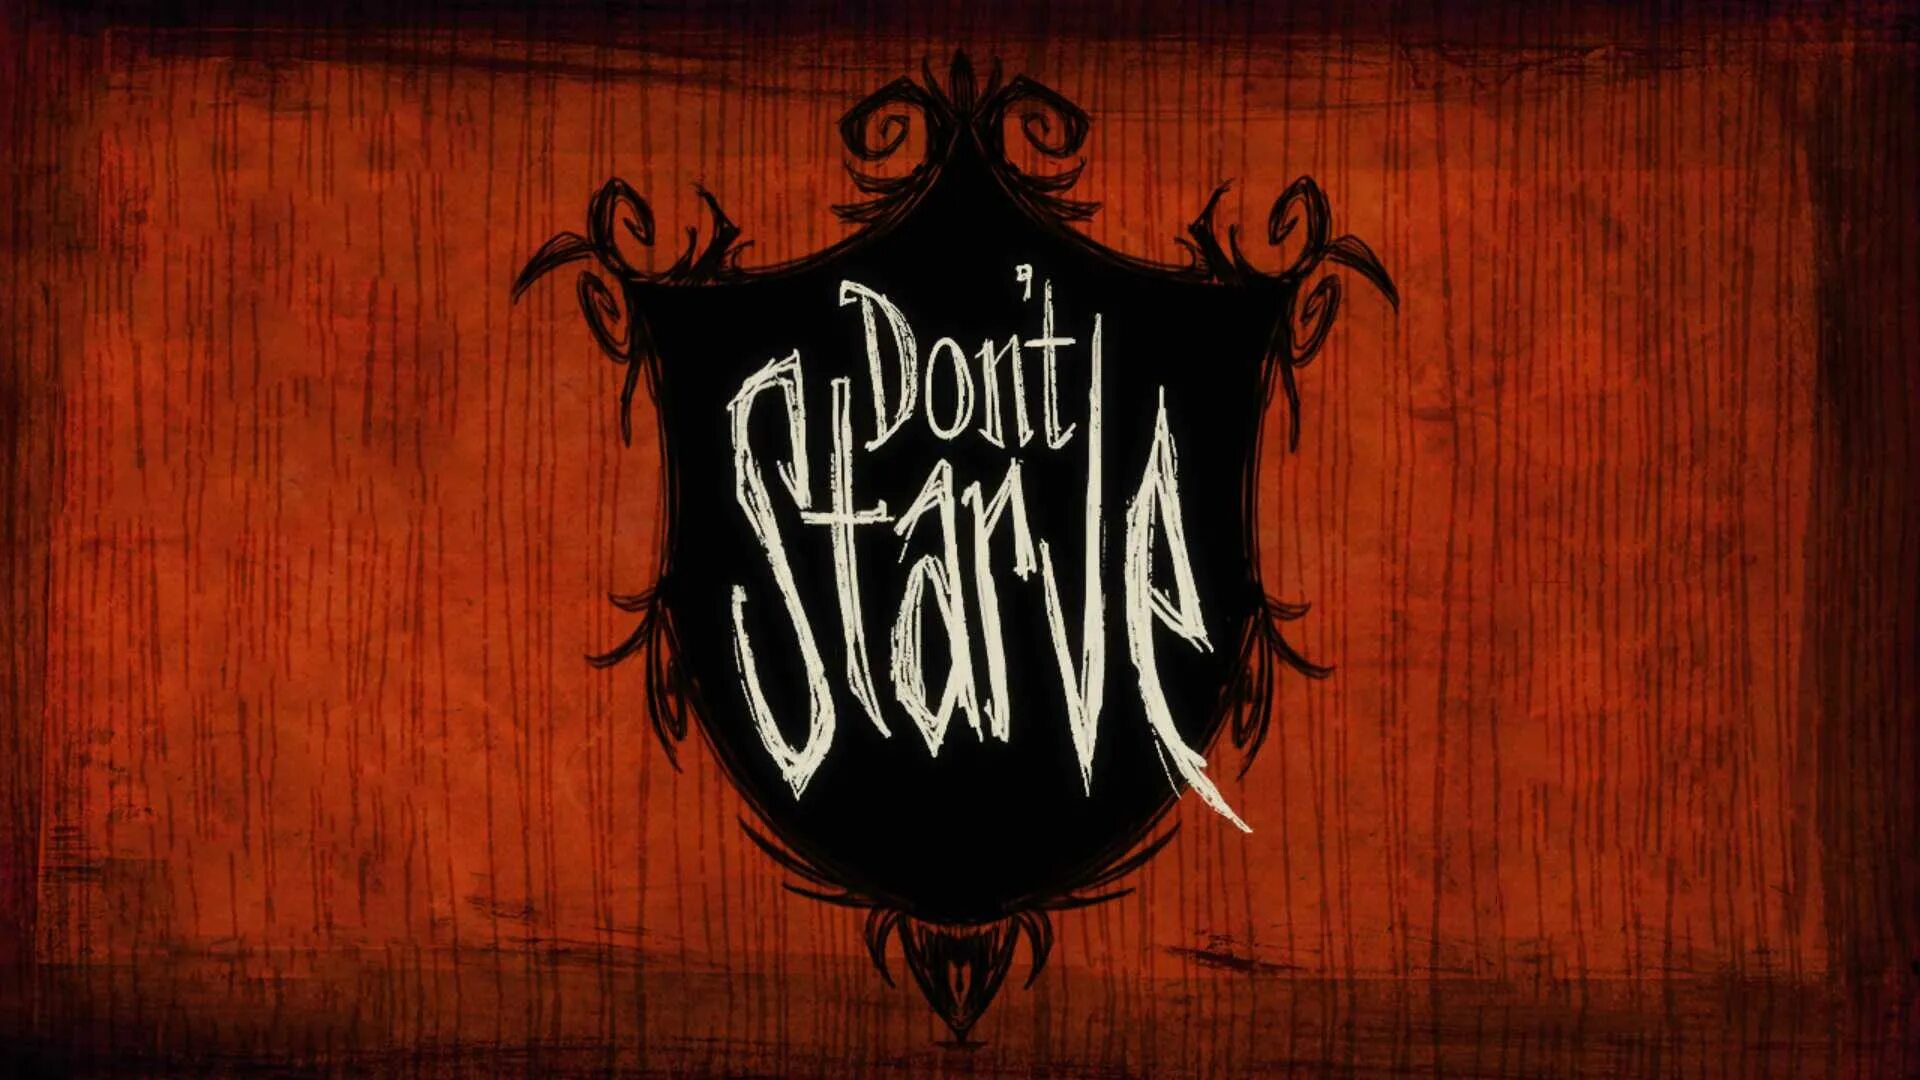 Don't Starve together menu. Don't Starve together меню. Don't Starve логотип. Don't Starve фон. Don t starve gaming